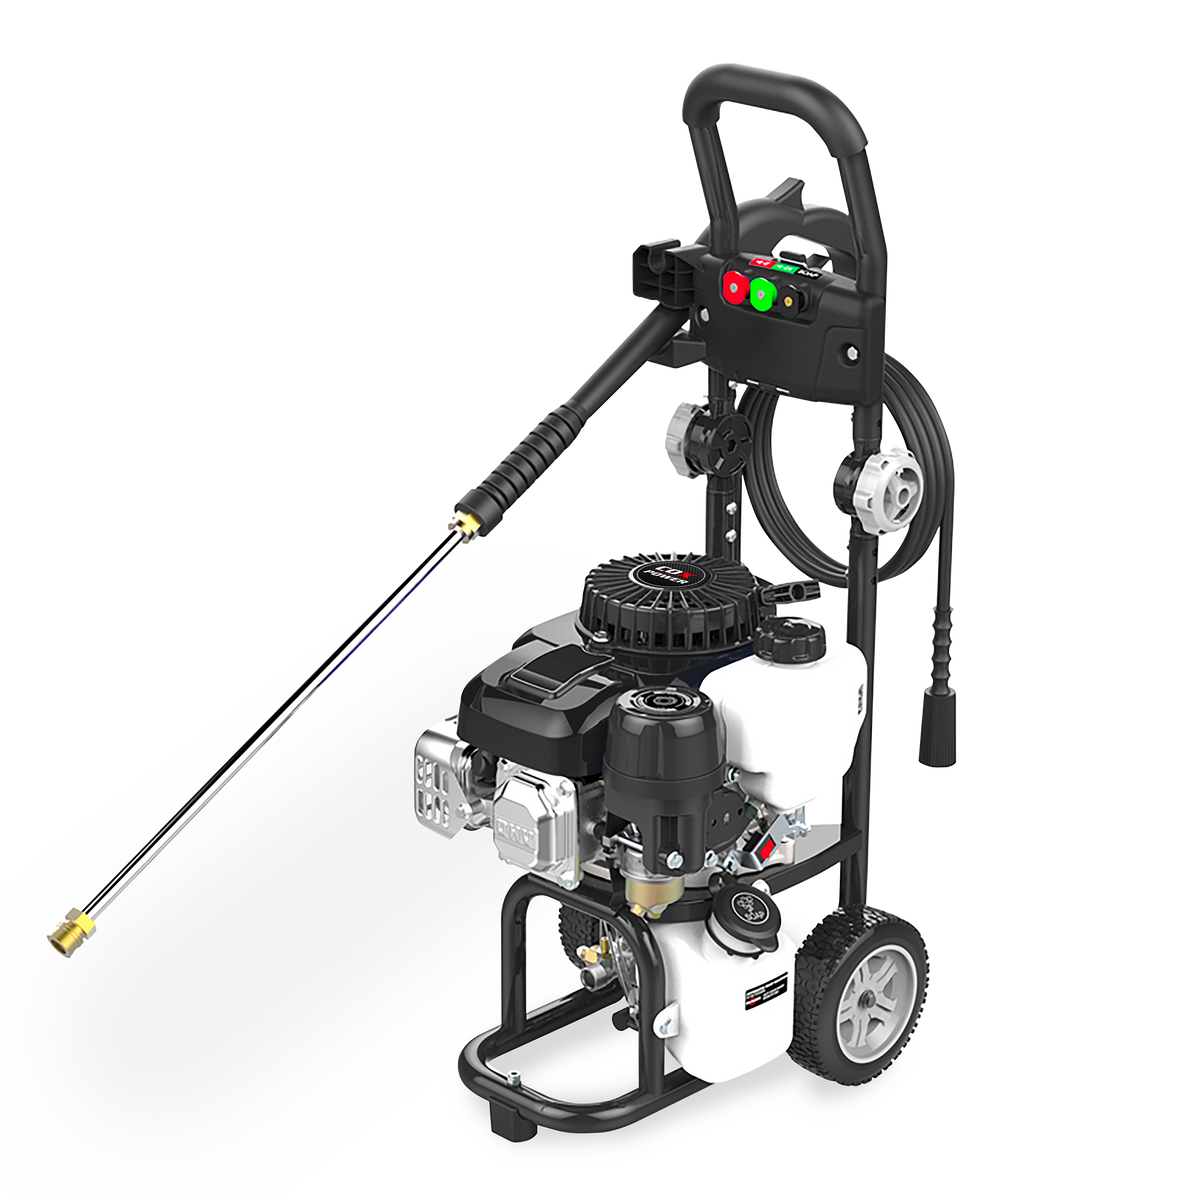 COX Power product image of a high pressure series pressure washer 2000psi